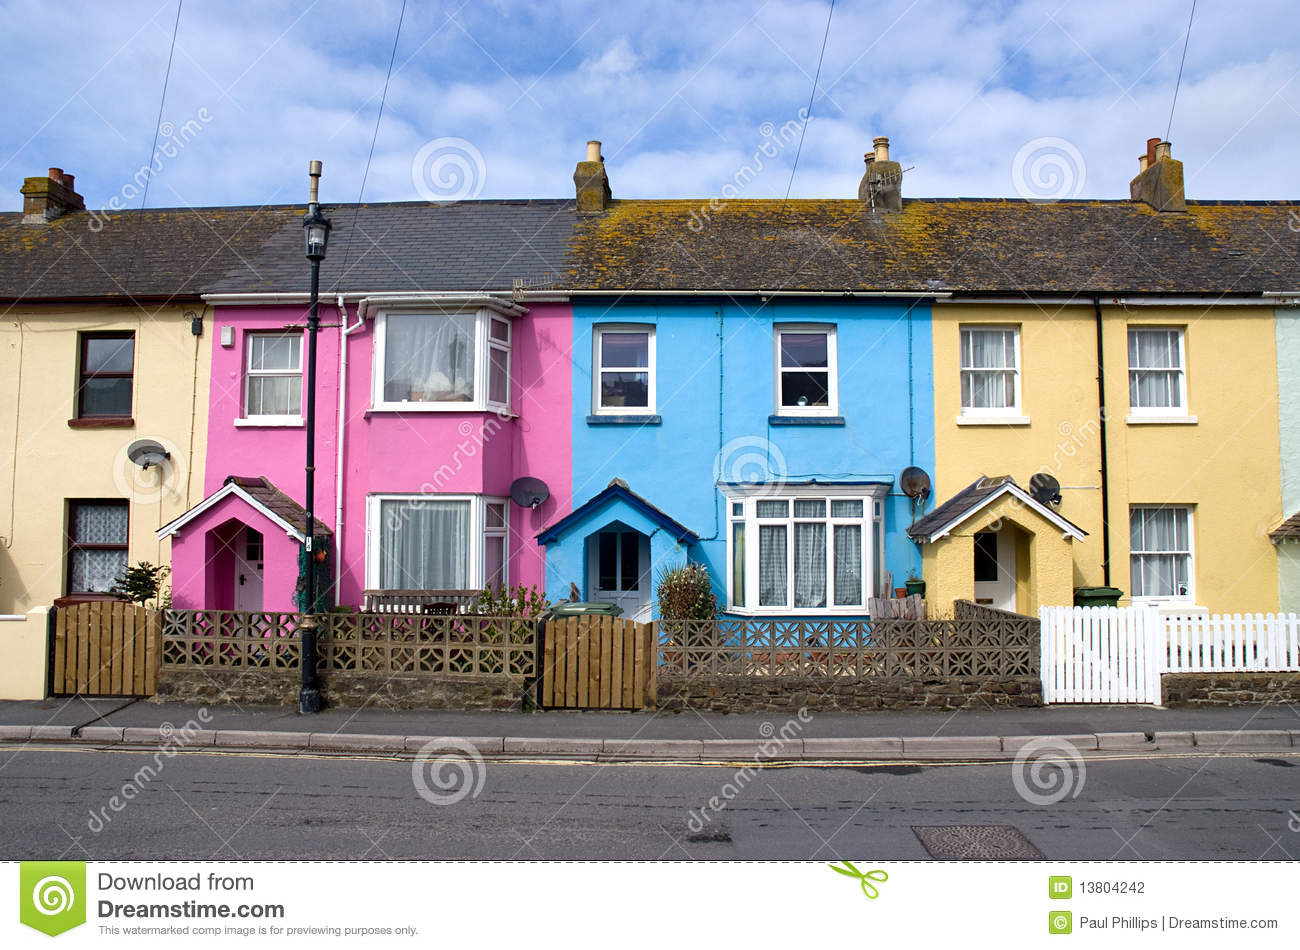 Different Colored Houses In A Row